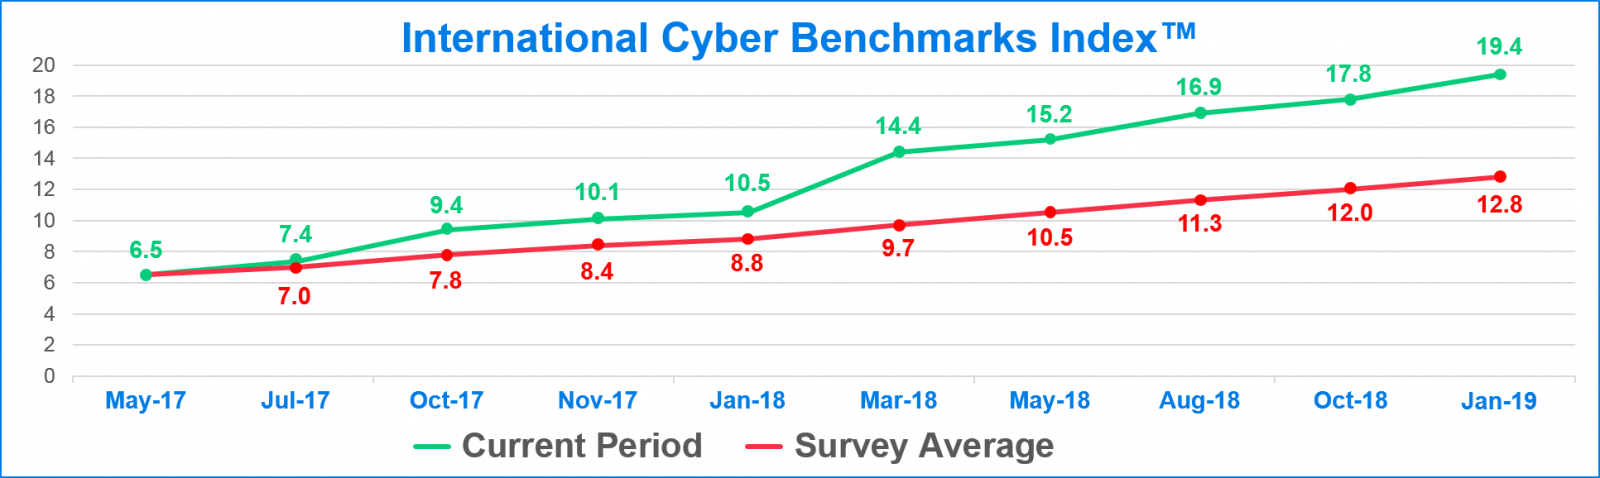 International Cyber Benchmarks Index for January 2019,